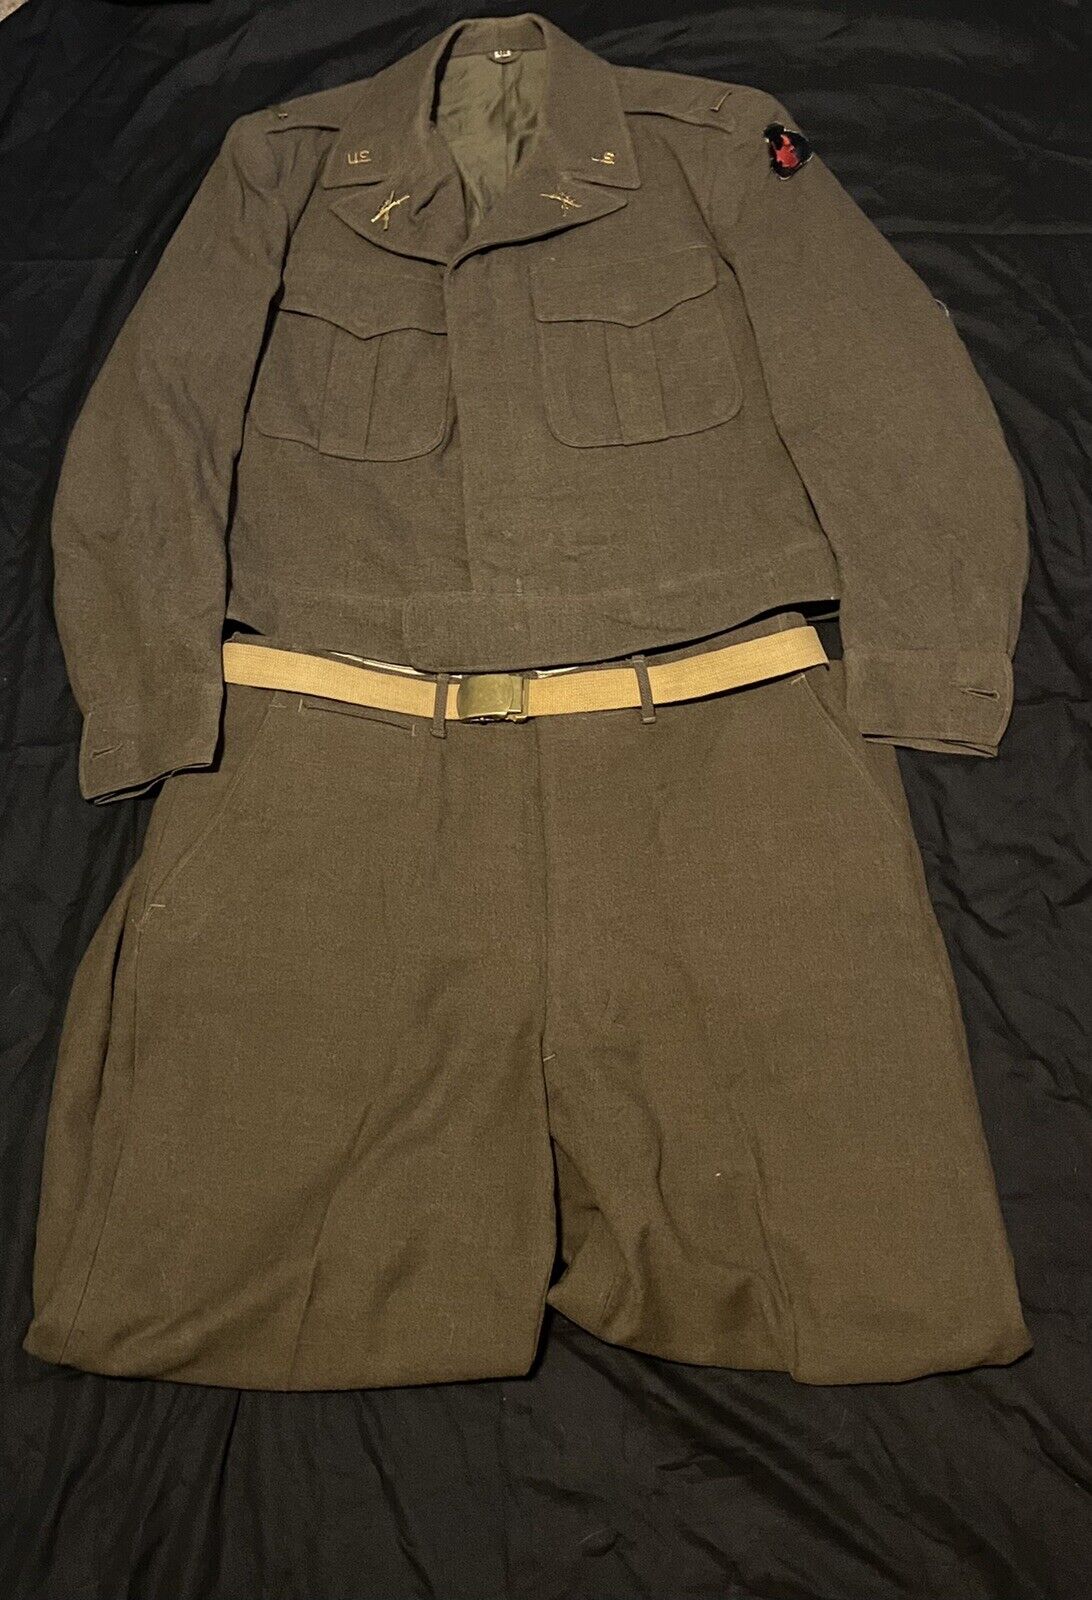 Post WW2 34th Infantry Officer Ike Jacket and Pants